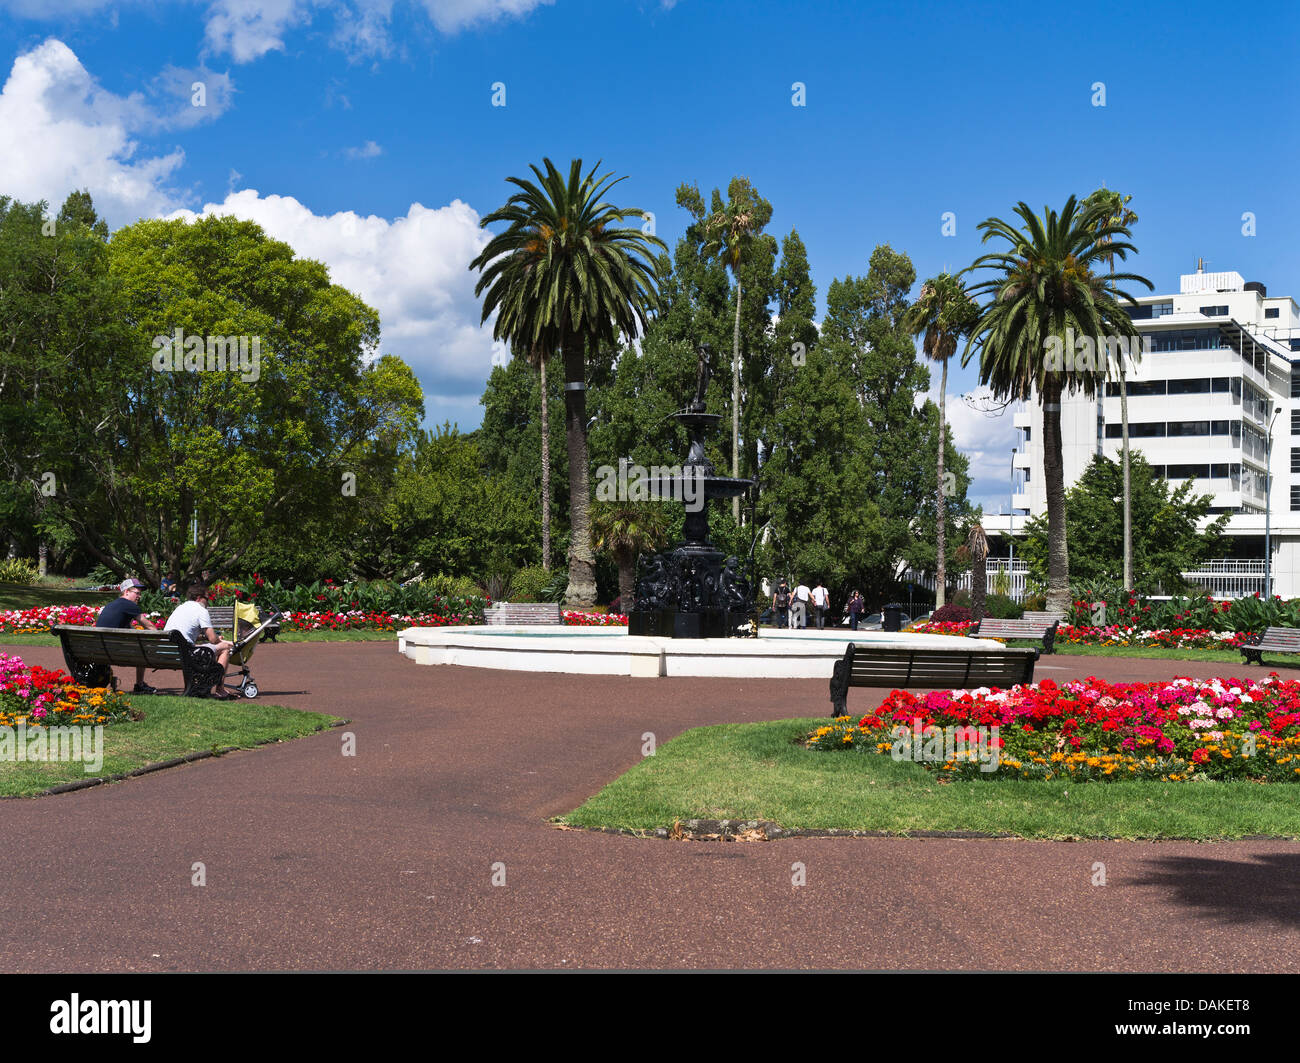 dh Albert Park AUCKLAND NEW ZEALAND People sitting bench relaxing fountain pool flower garden city parks Stock Photo